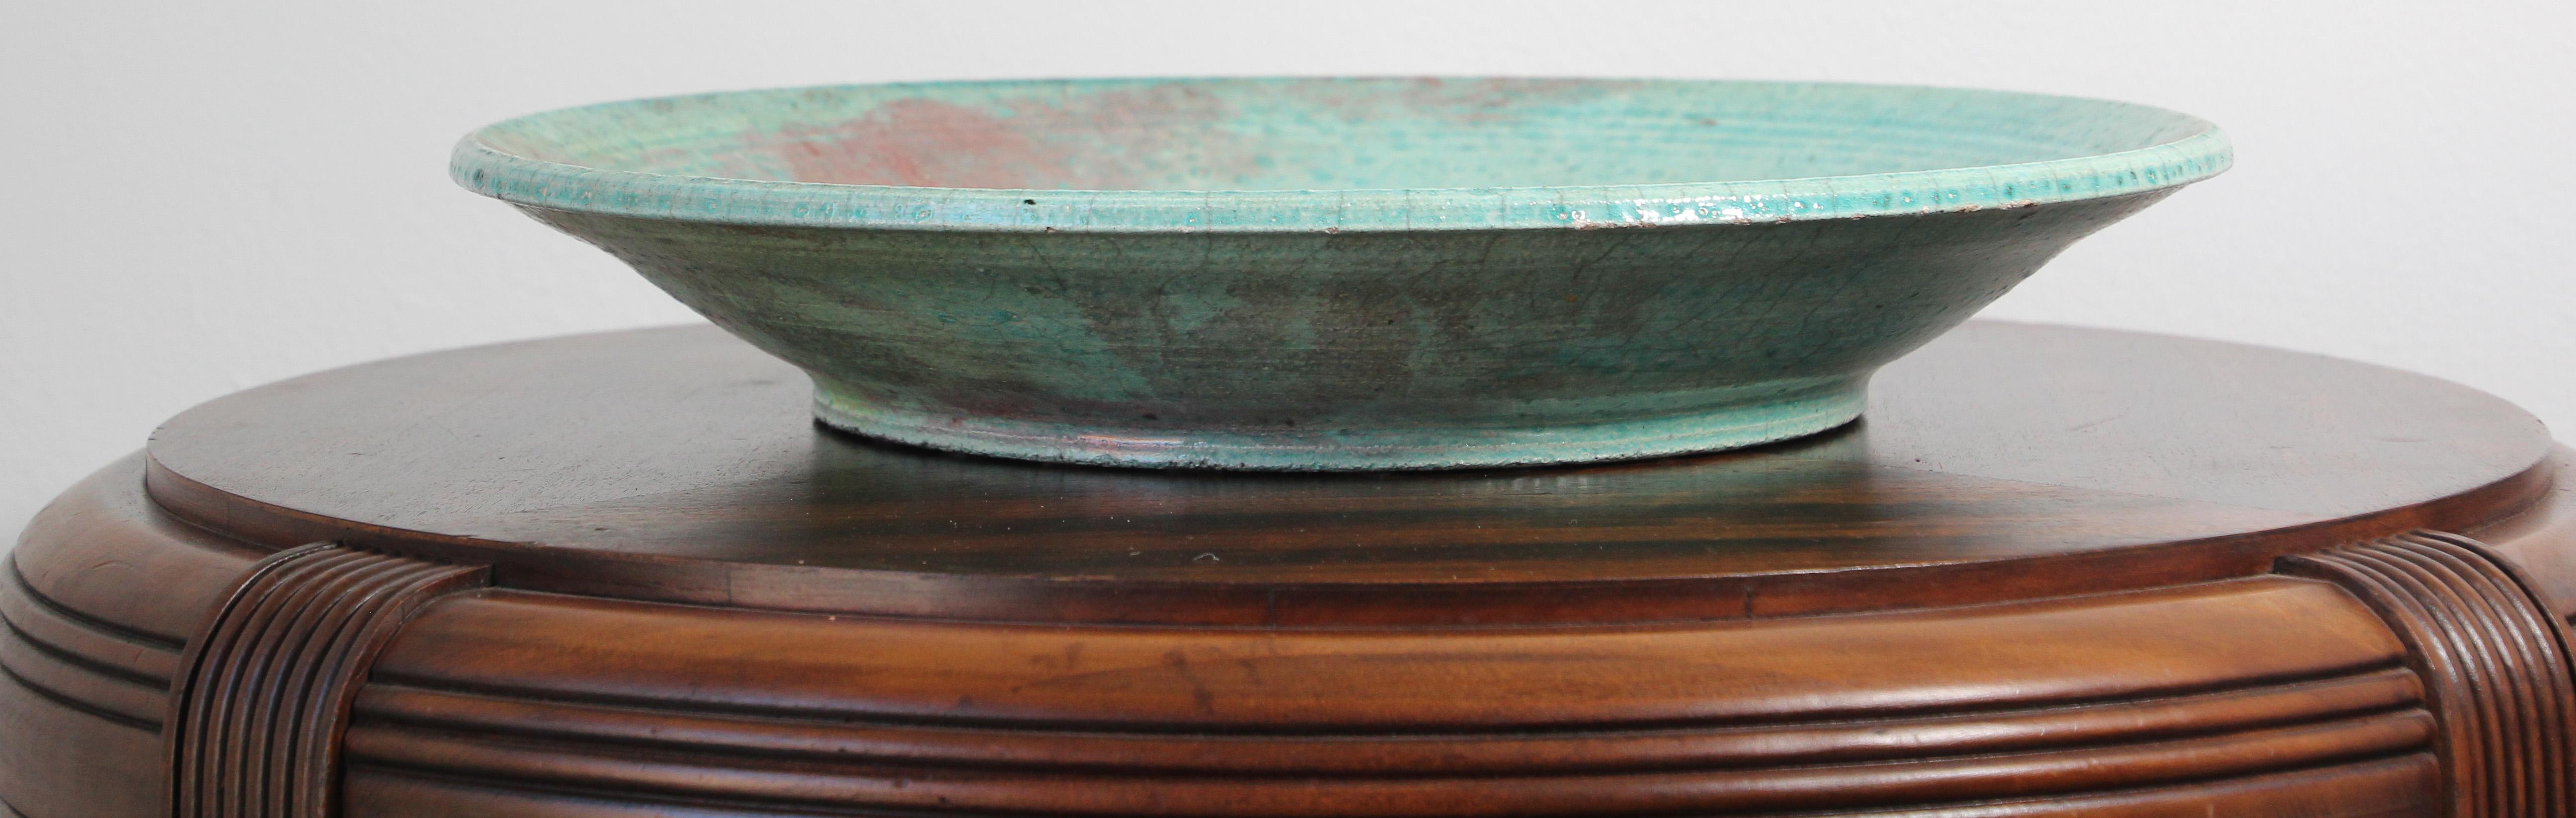 Handcrafted Italian Art Studio Large Stoneware Bowl Aqua Color In Good Condition For Sale In North Hollywood, CA